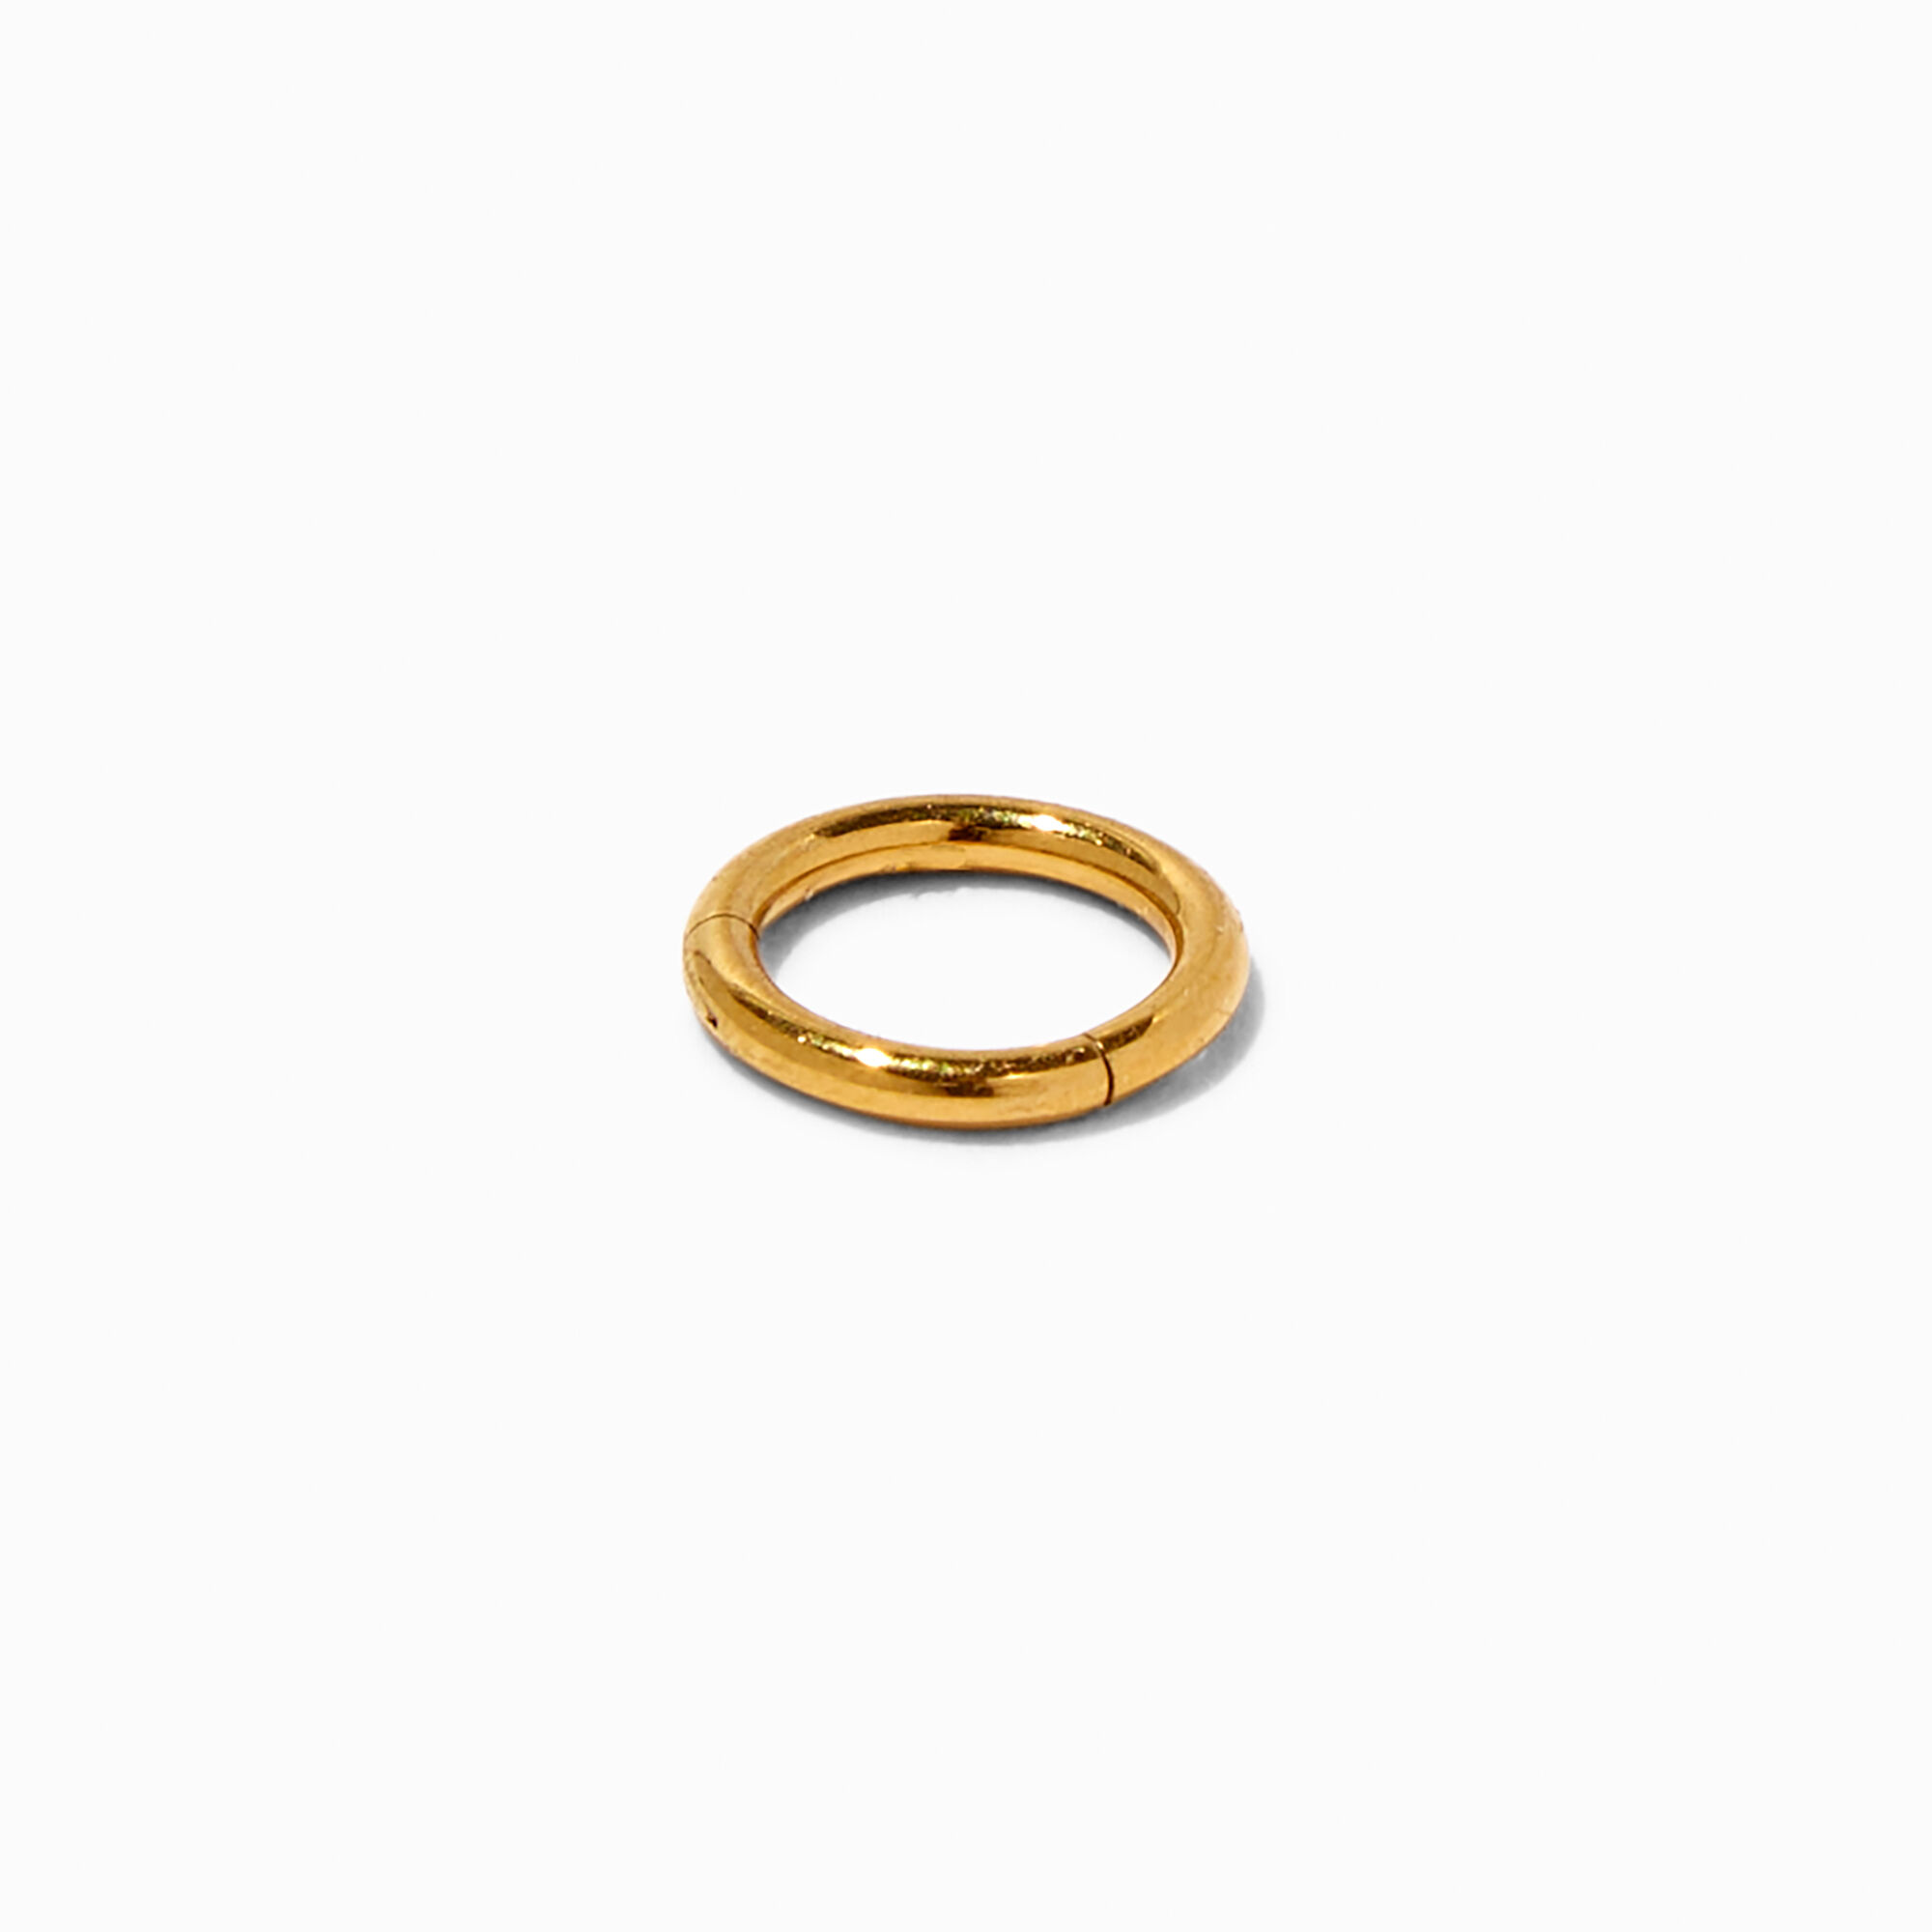 View Claires Tone 16G Mini Clicker Hoop Rook Earring Gold information